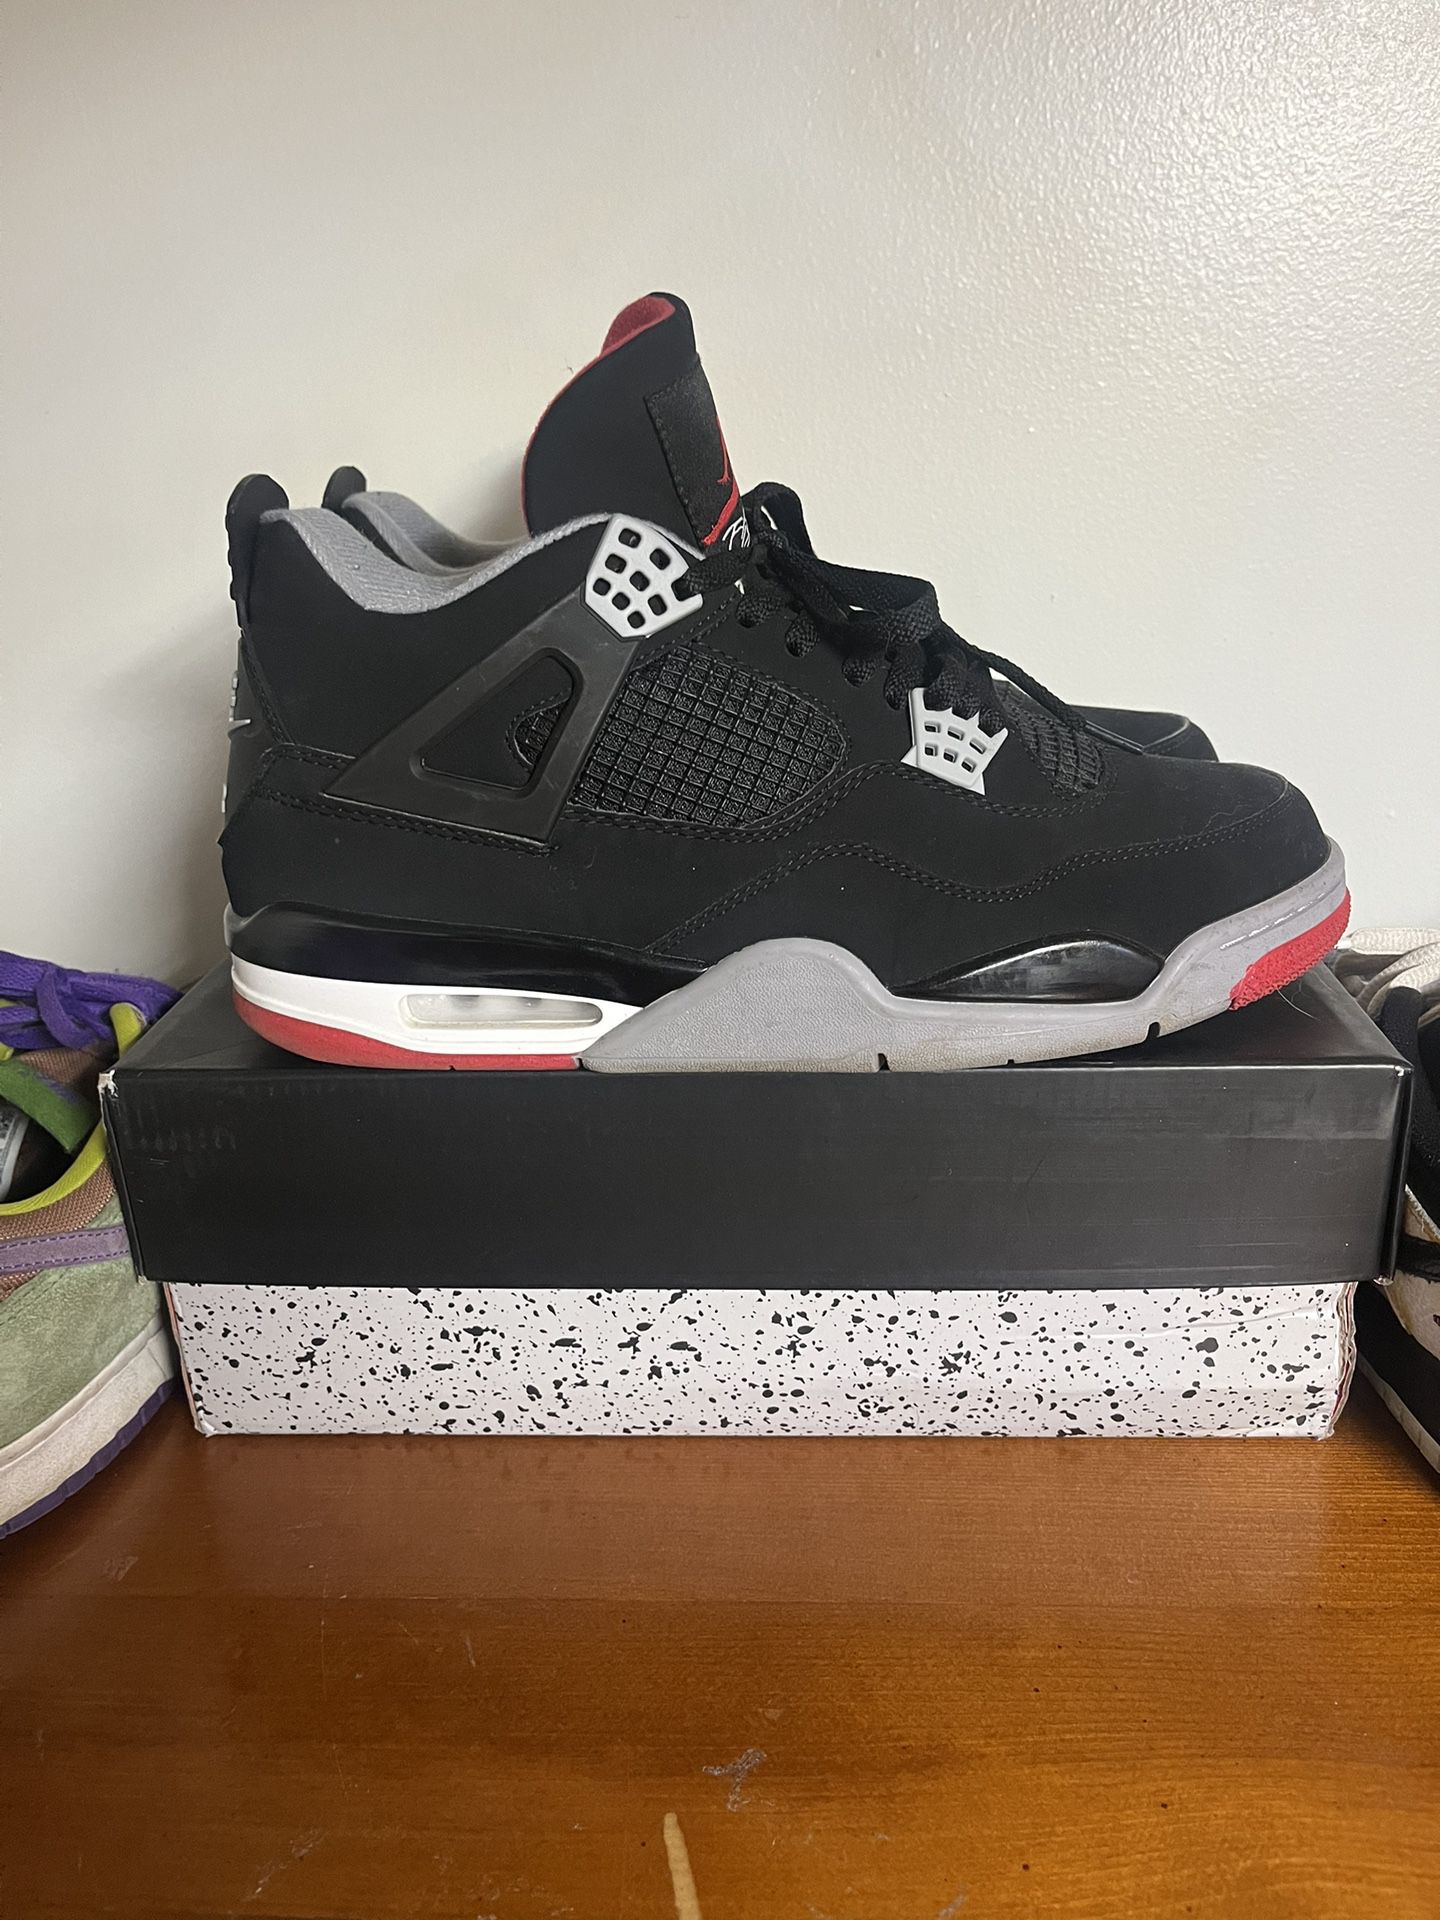 Bred 4s Size 13